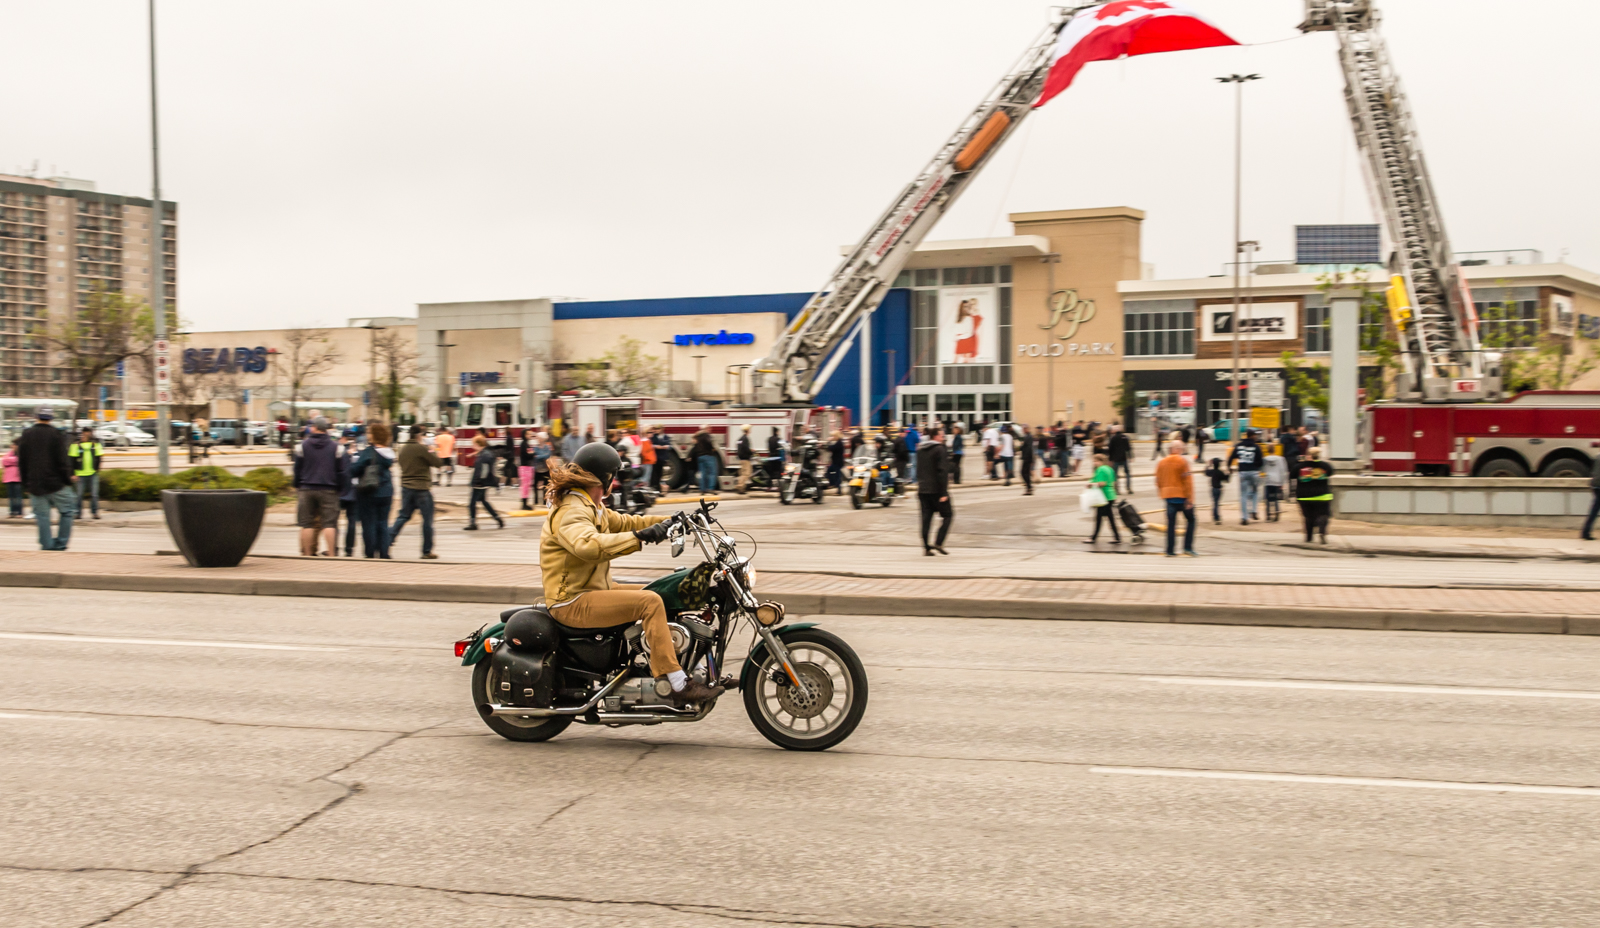 rider on motorcycle riding the wrong way by after the of the 2016 RFD